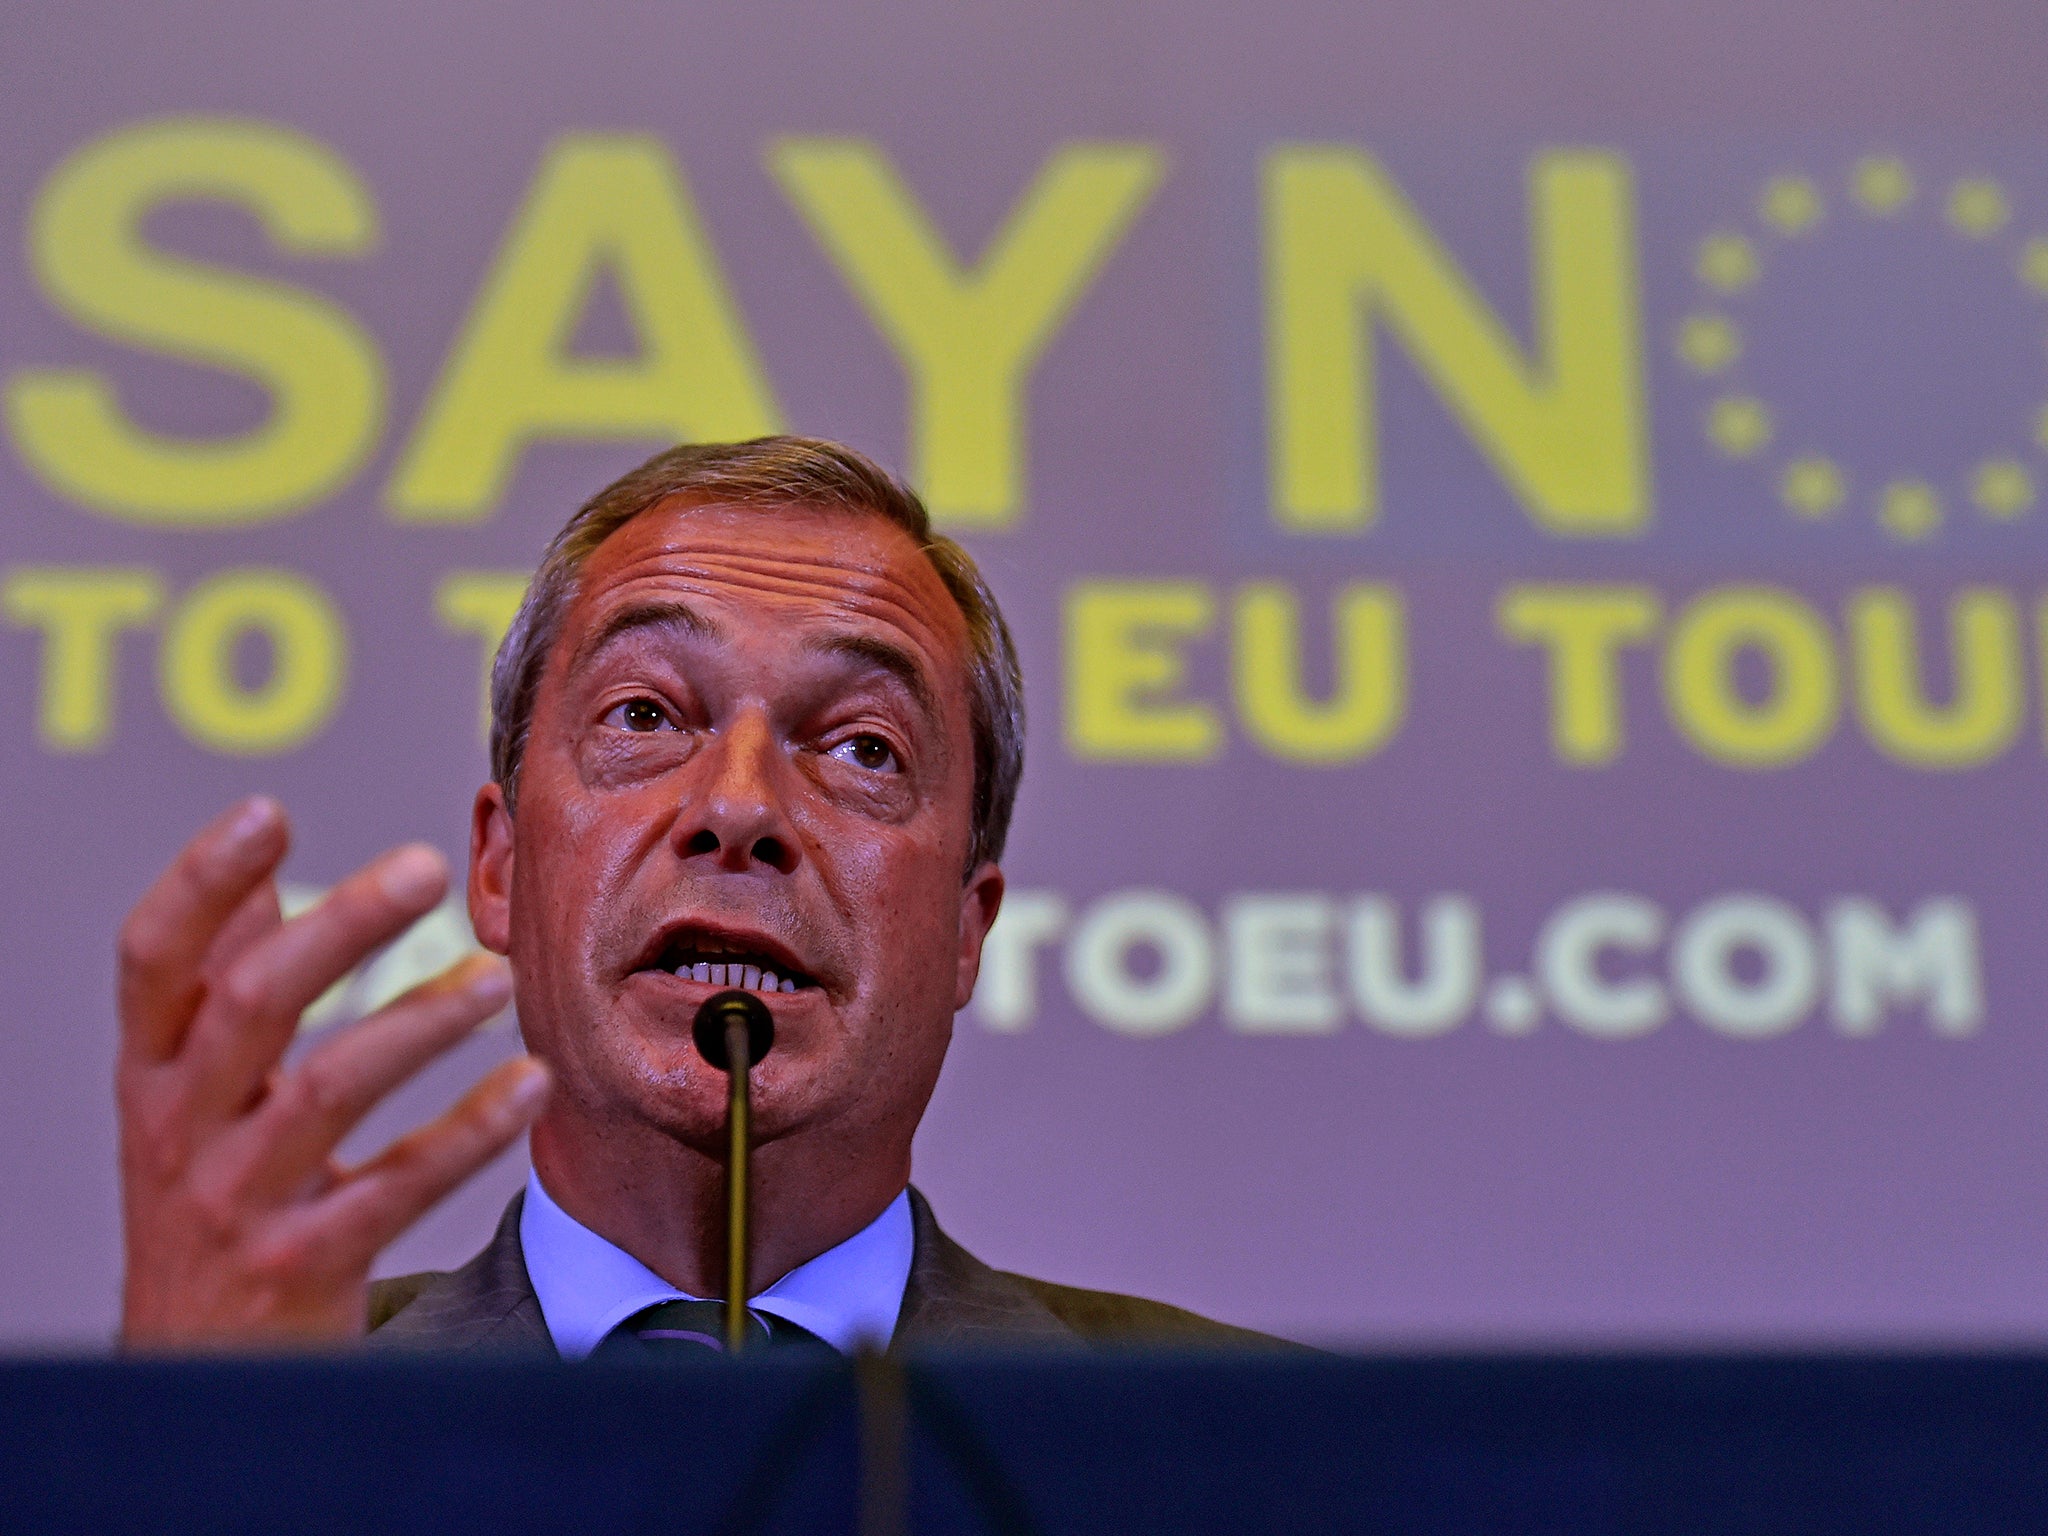 Nigel Farage has formed the Alliance for Direct Democracy in Europe (ADDE), which some sceptics suggest is Ukip’s way of channelling EU money into the Out campaign